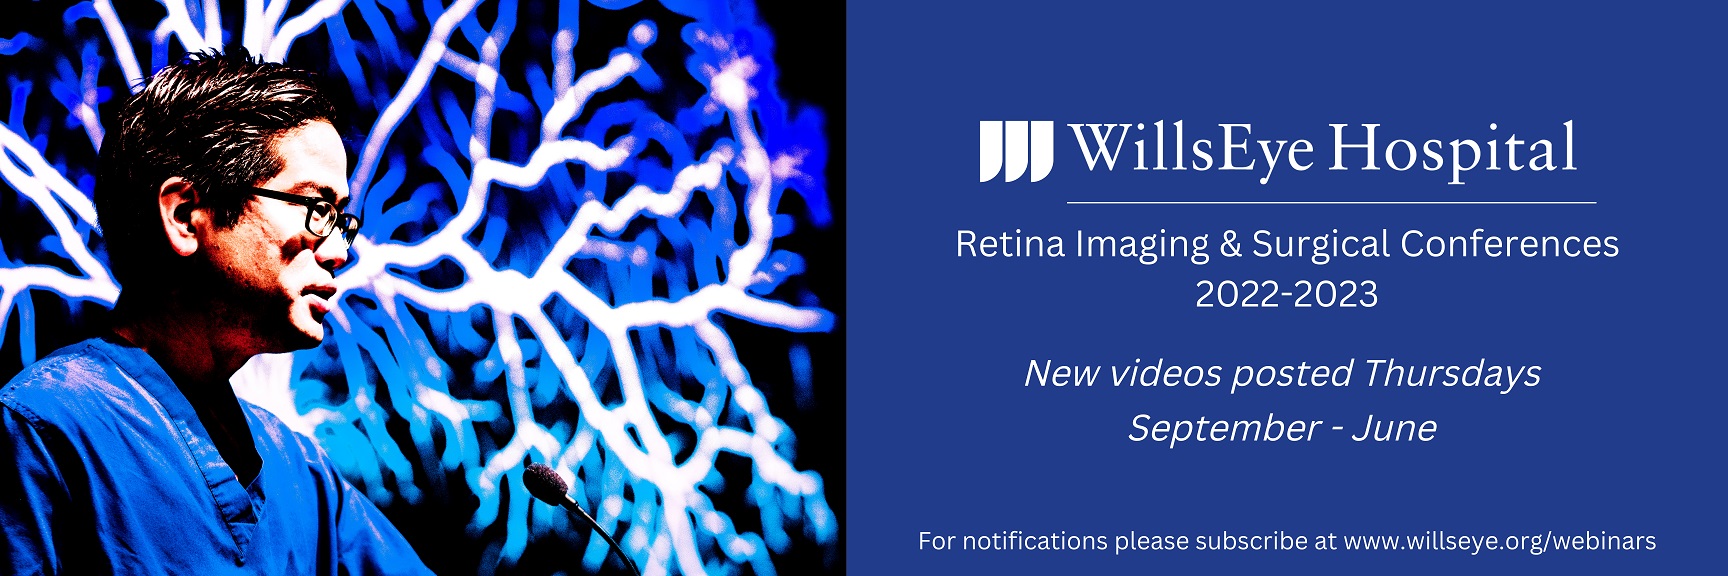 OnDemand Retina Imaging & Surgical Conferences 2022-2023 Academic Year [NON-CME] Banner